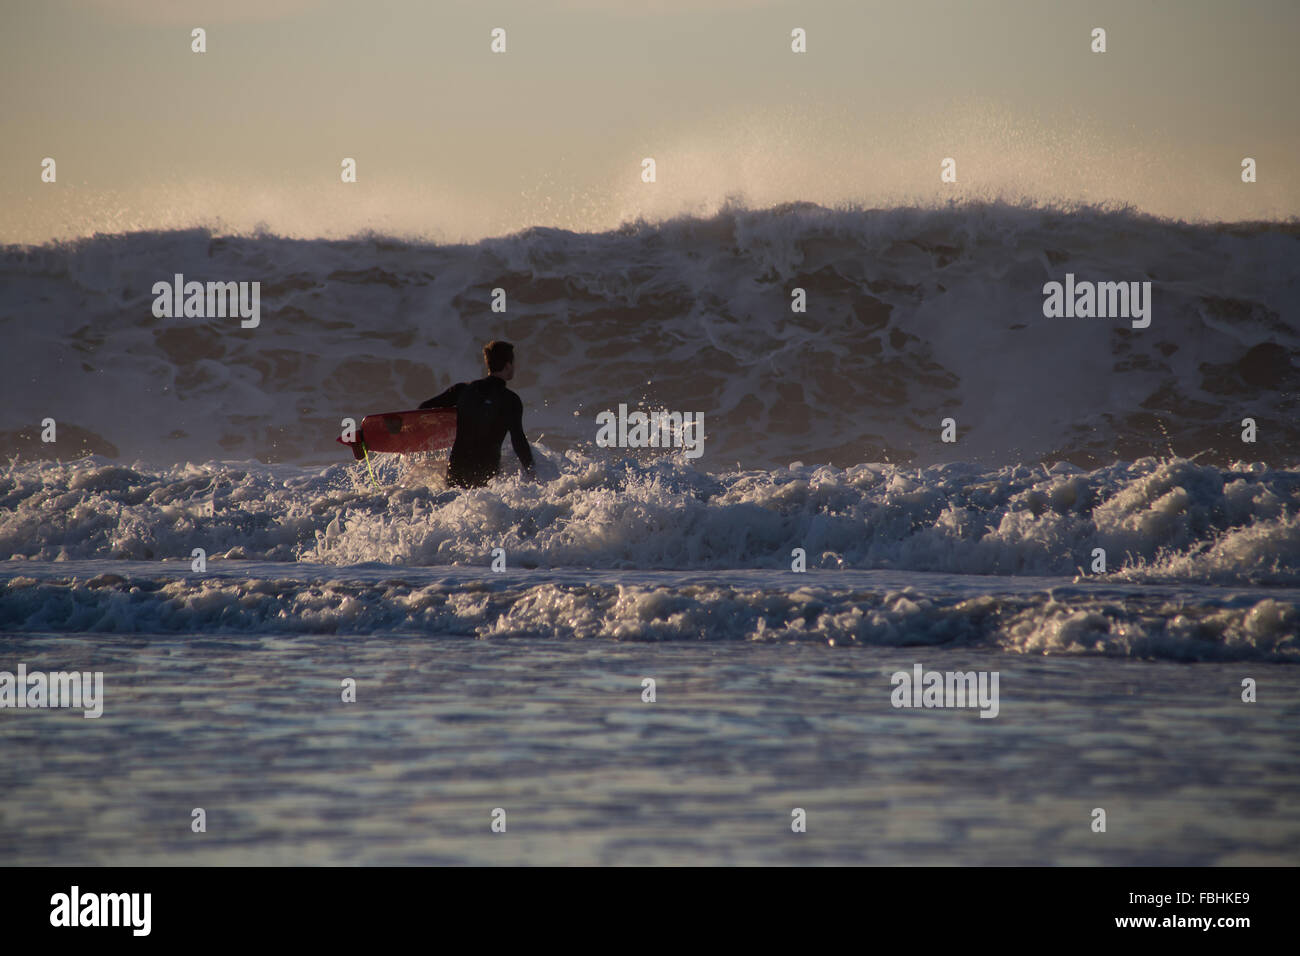 Surfer about to paddle out in high surf. Photographed in Rockaway Beach, Queens, New York, in October 2015. Stock Photo